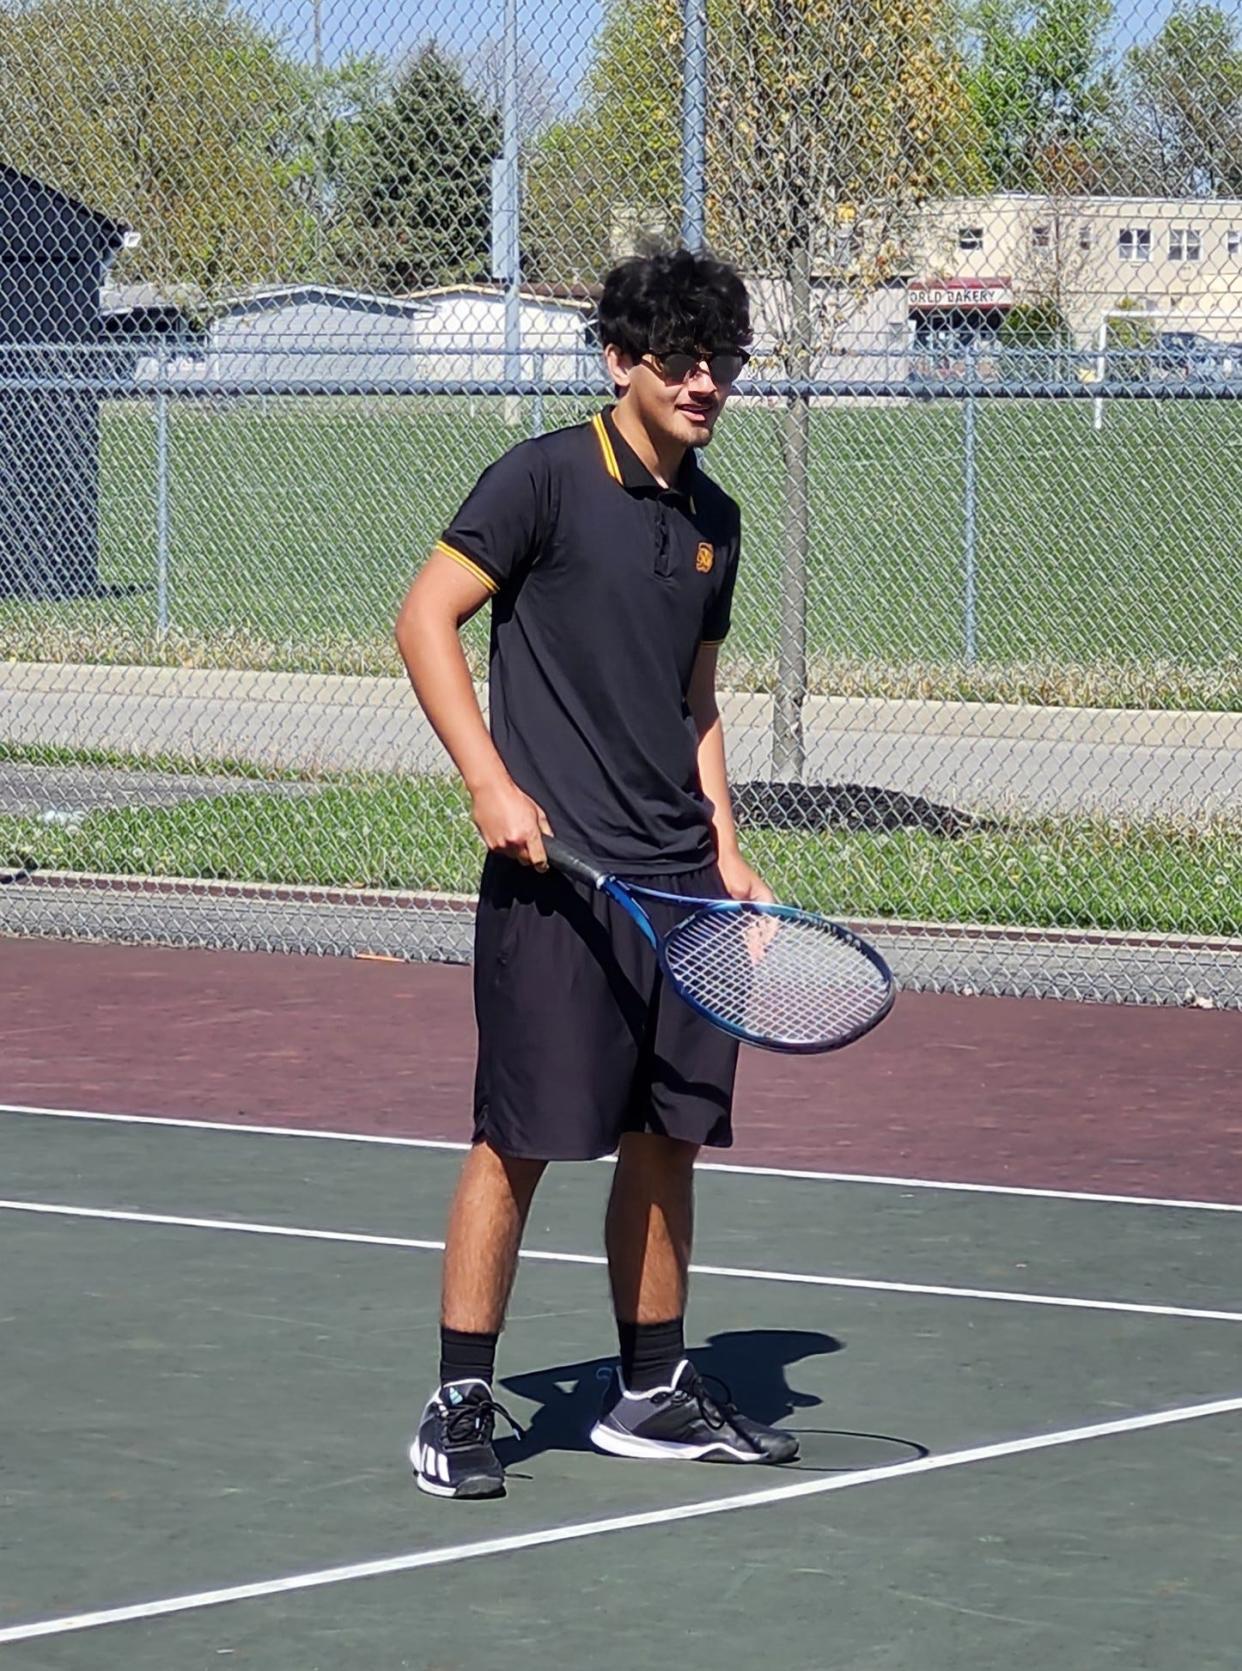 Nathaniel Wimbley, shown here warming up before a match Monday against Grove City, is one of several seniors leading Franklin Heights' quest for a second consecutive winning season and only its second this century.